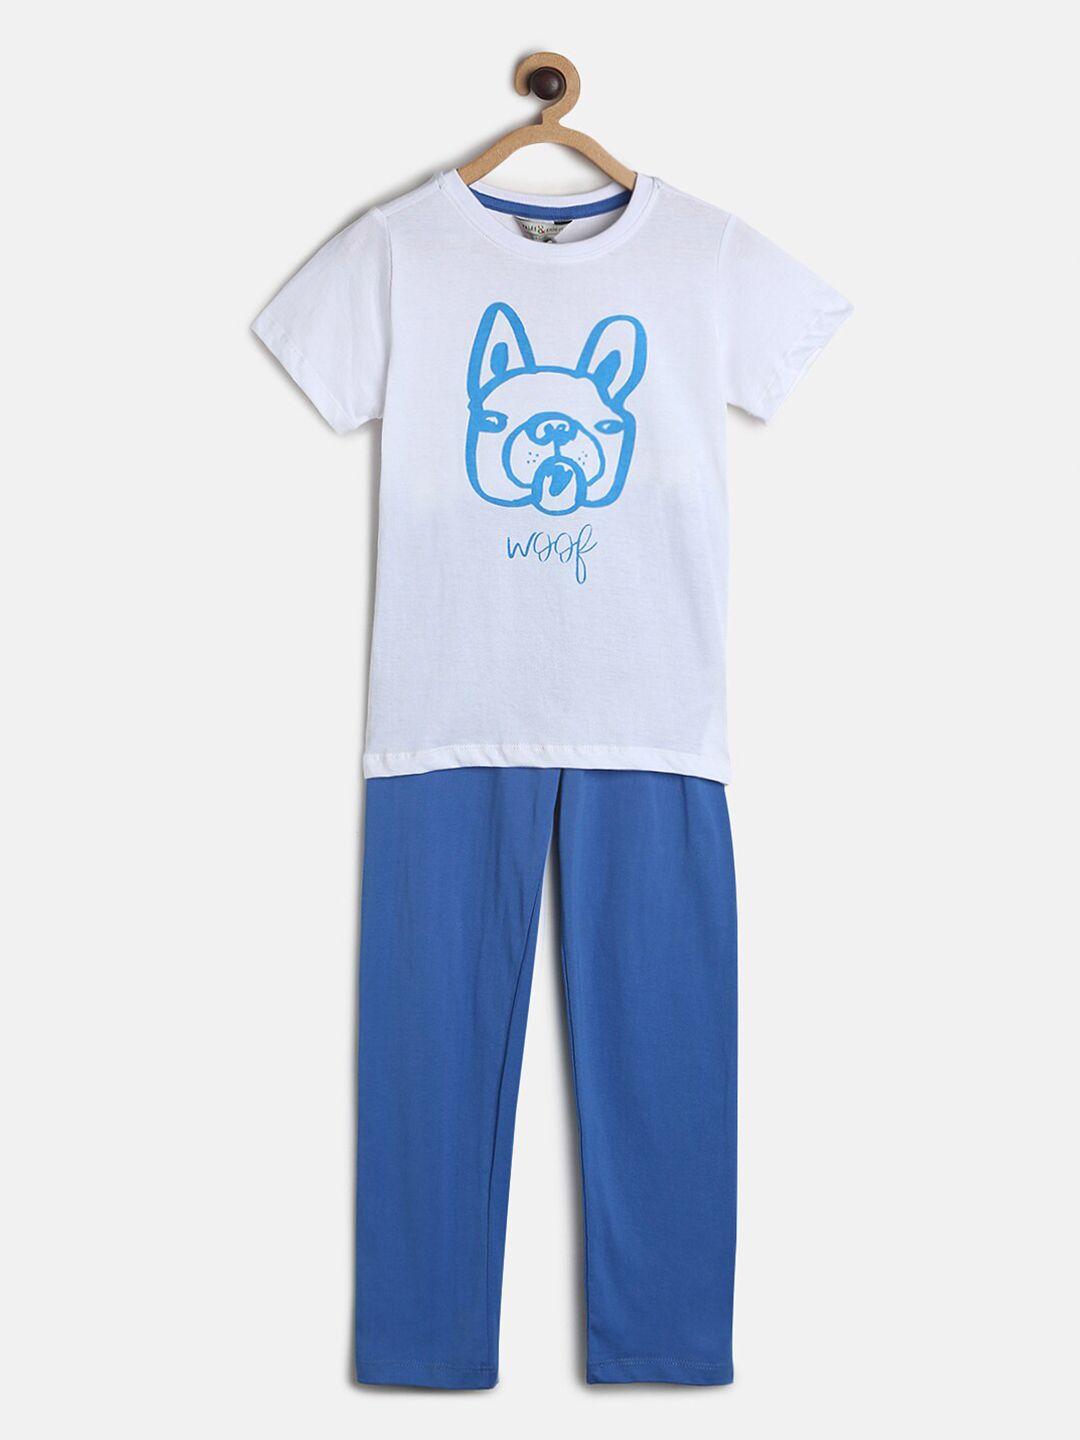 tales & stories boys white & blue printed night suit